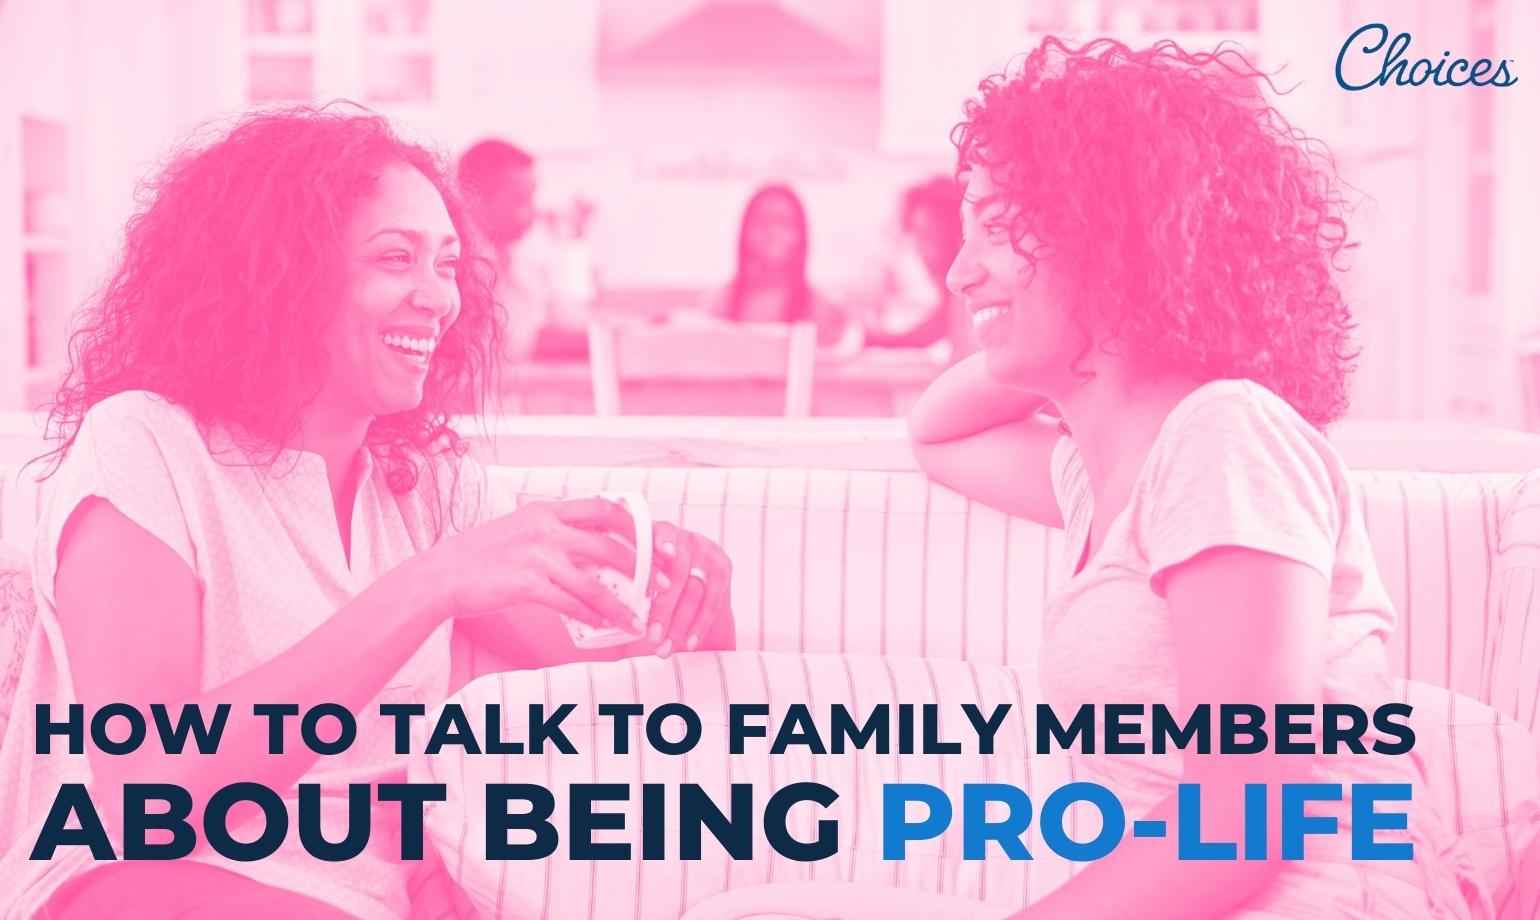 How to Talk to Family Members About Being Pro-Life